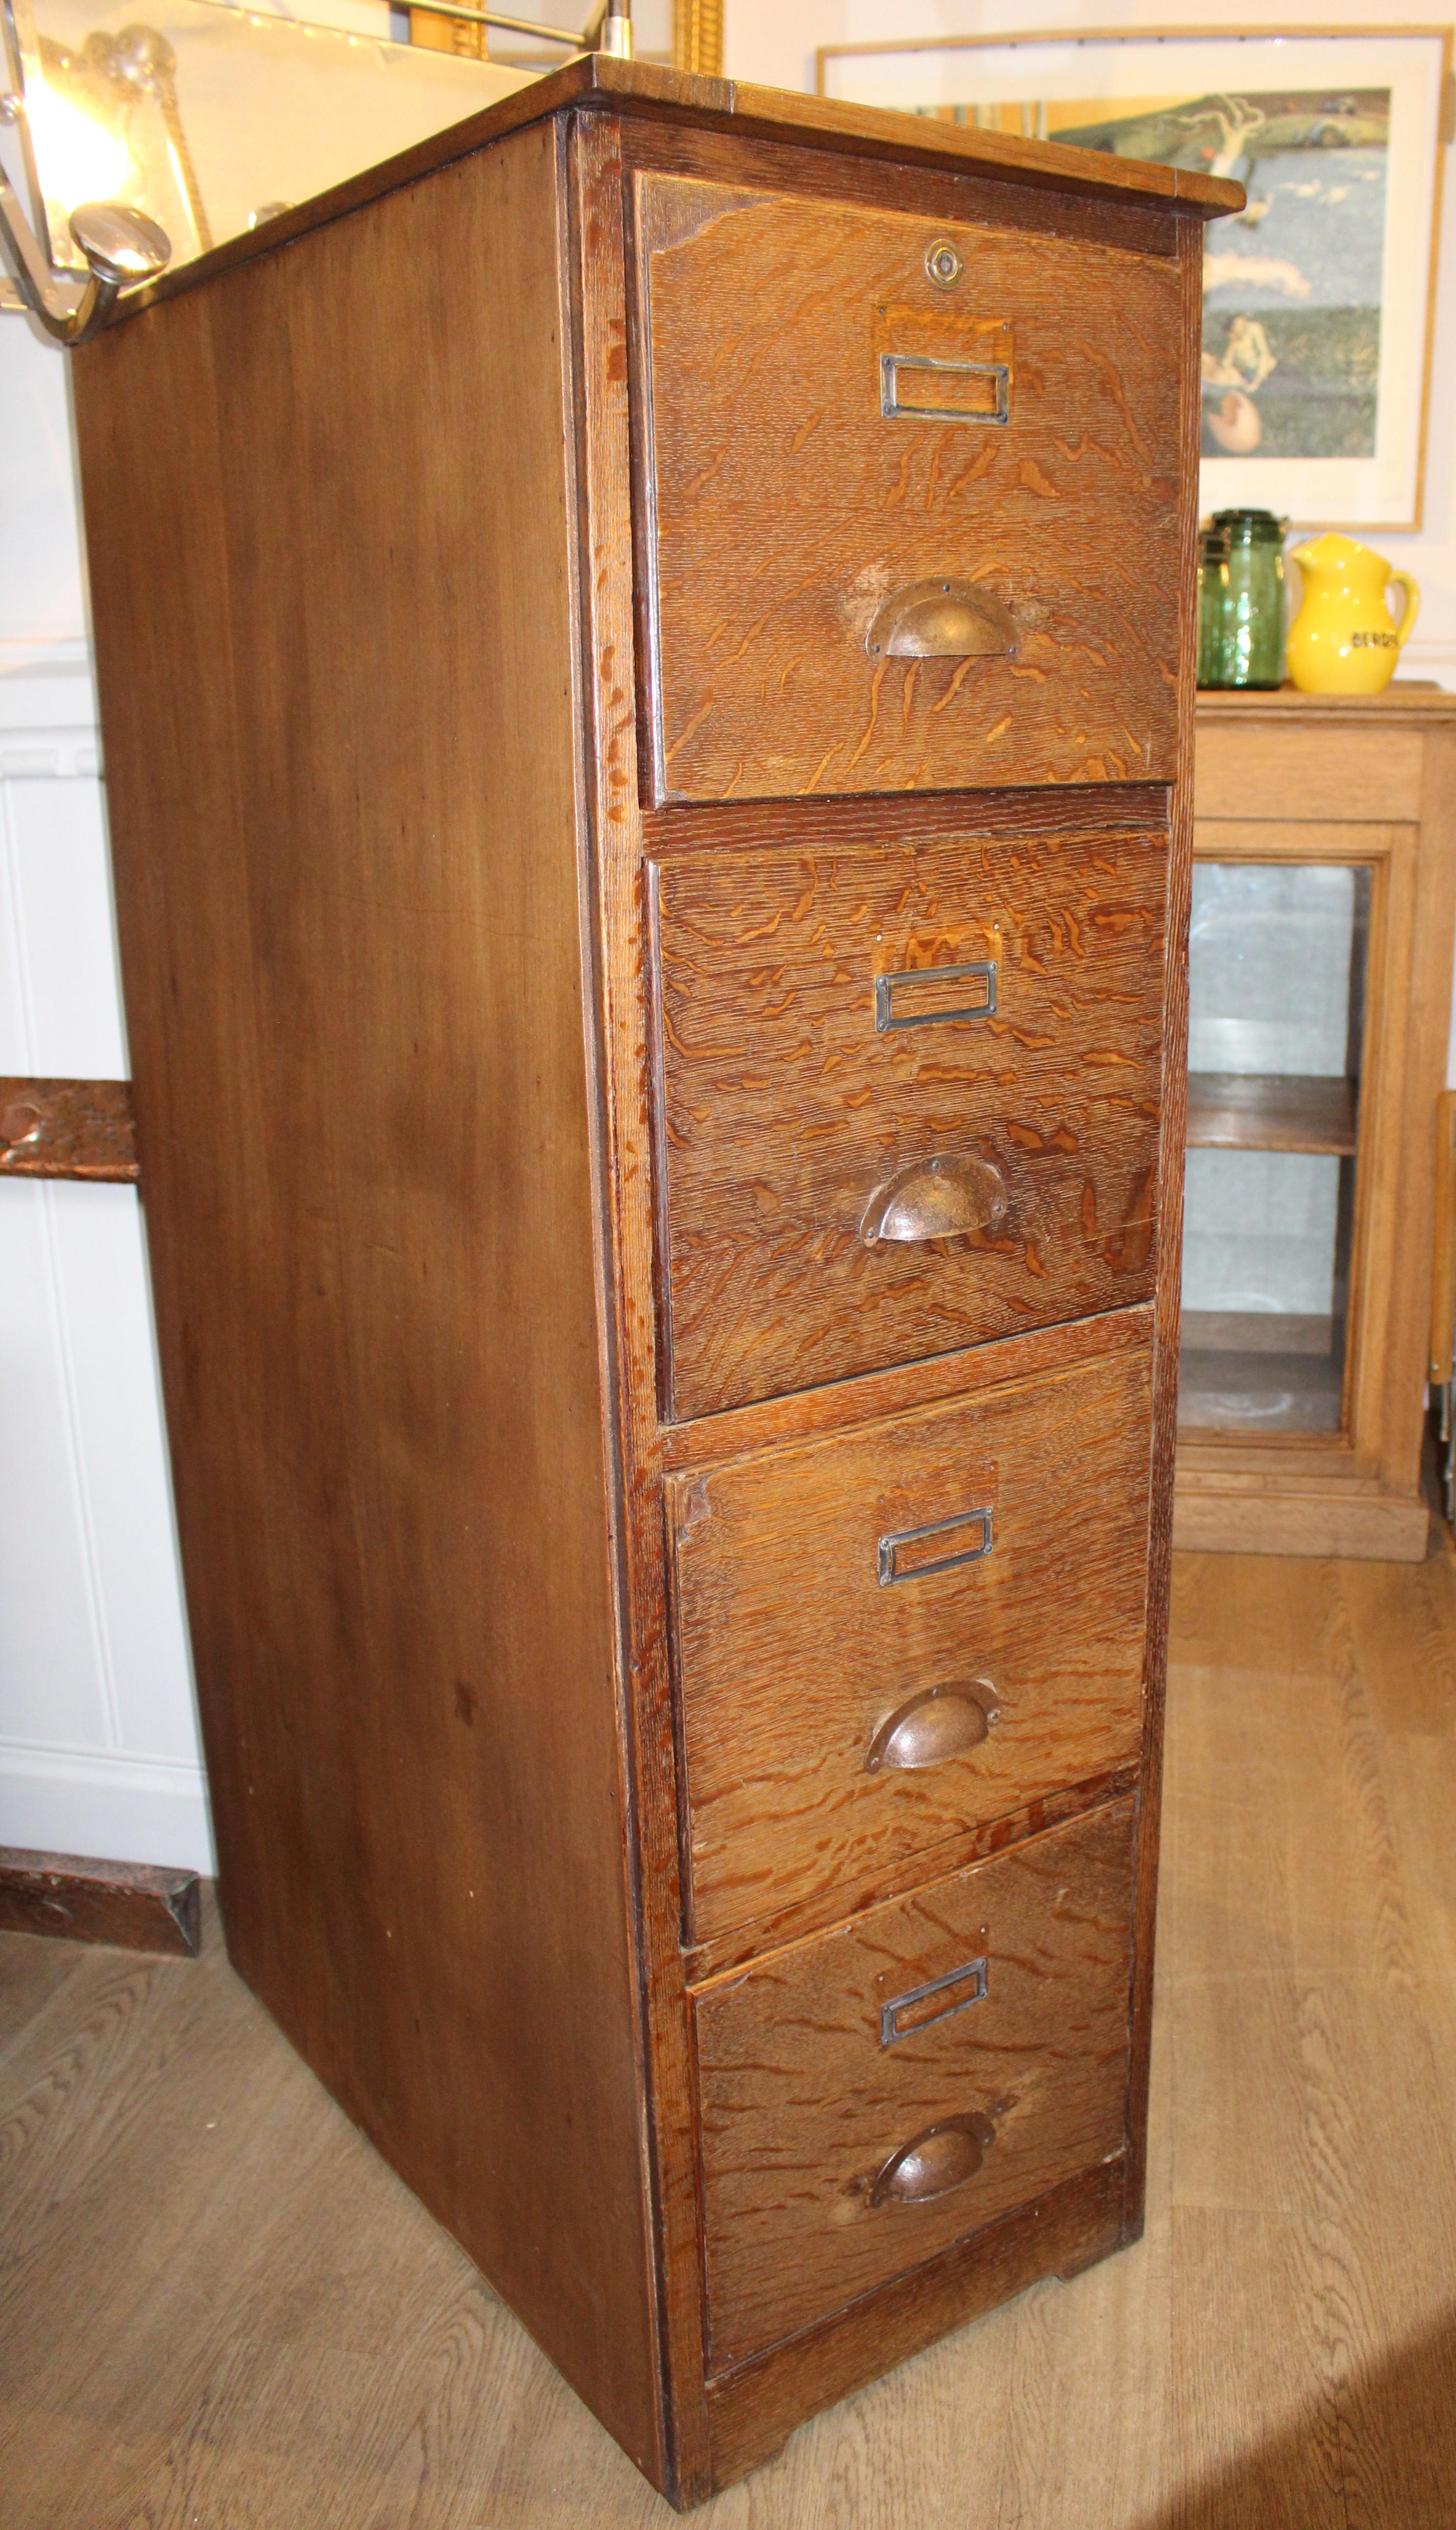 Utilitarian 1940s French quarter sawn oak filing cabinet.
This cabinet is made of oak on the front, top and back (lovely panelled back). The two sides are made of plywood, which suggests that this cabinet was one of many/ in a row in some